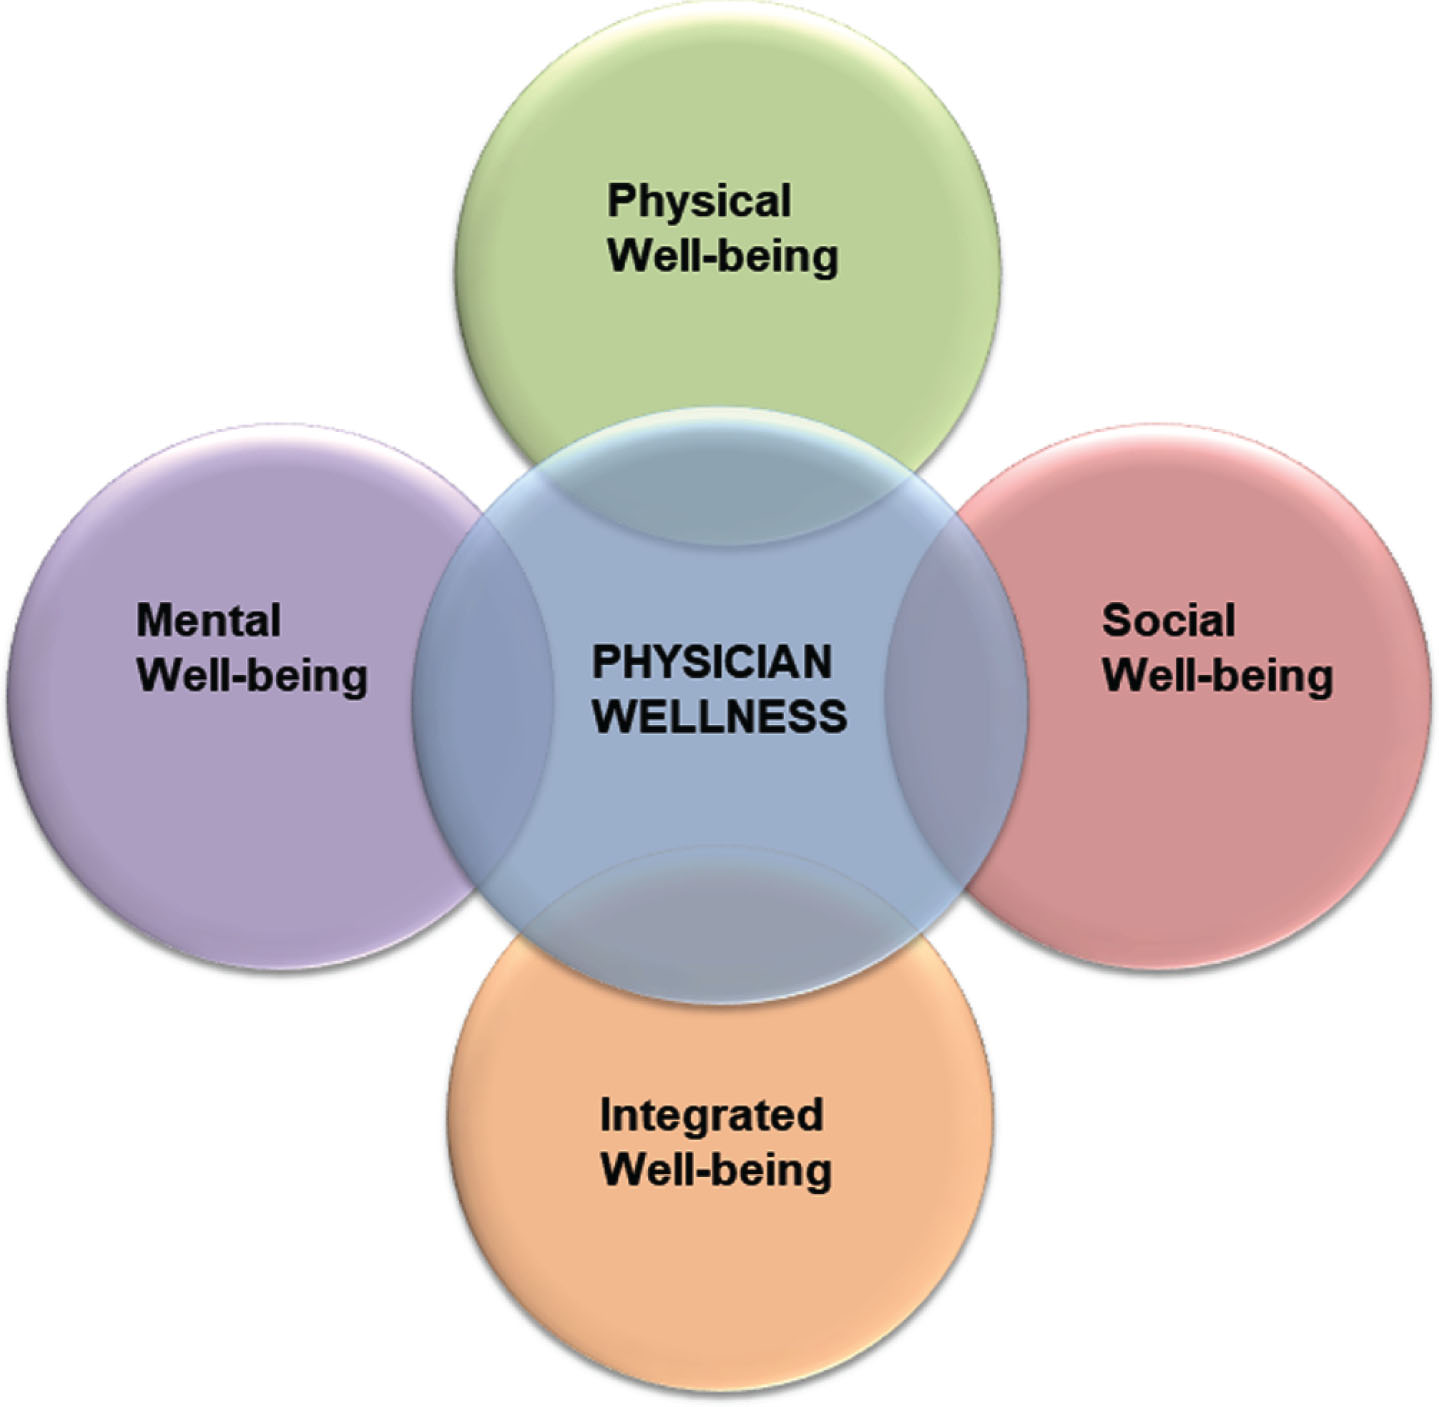 Domains of wellness.